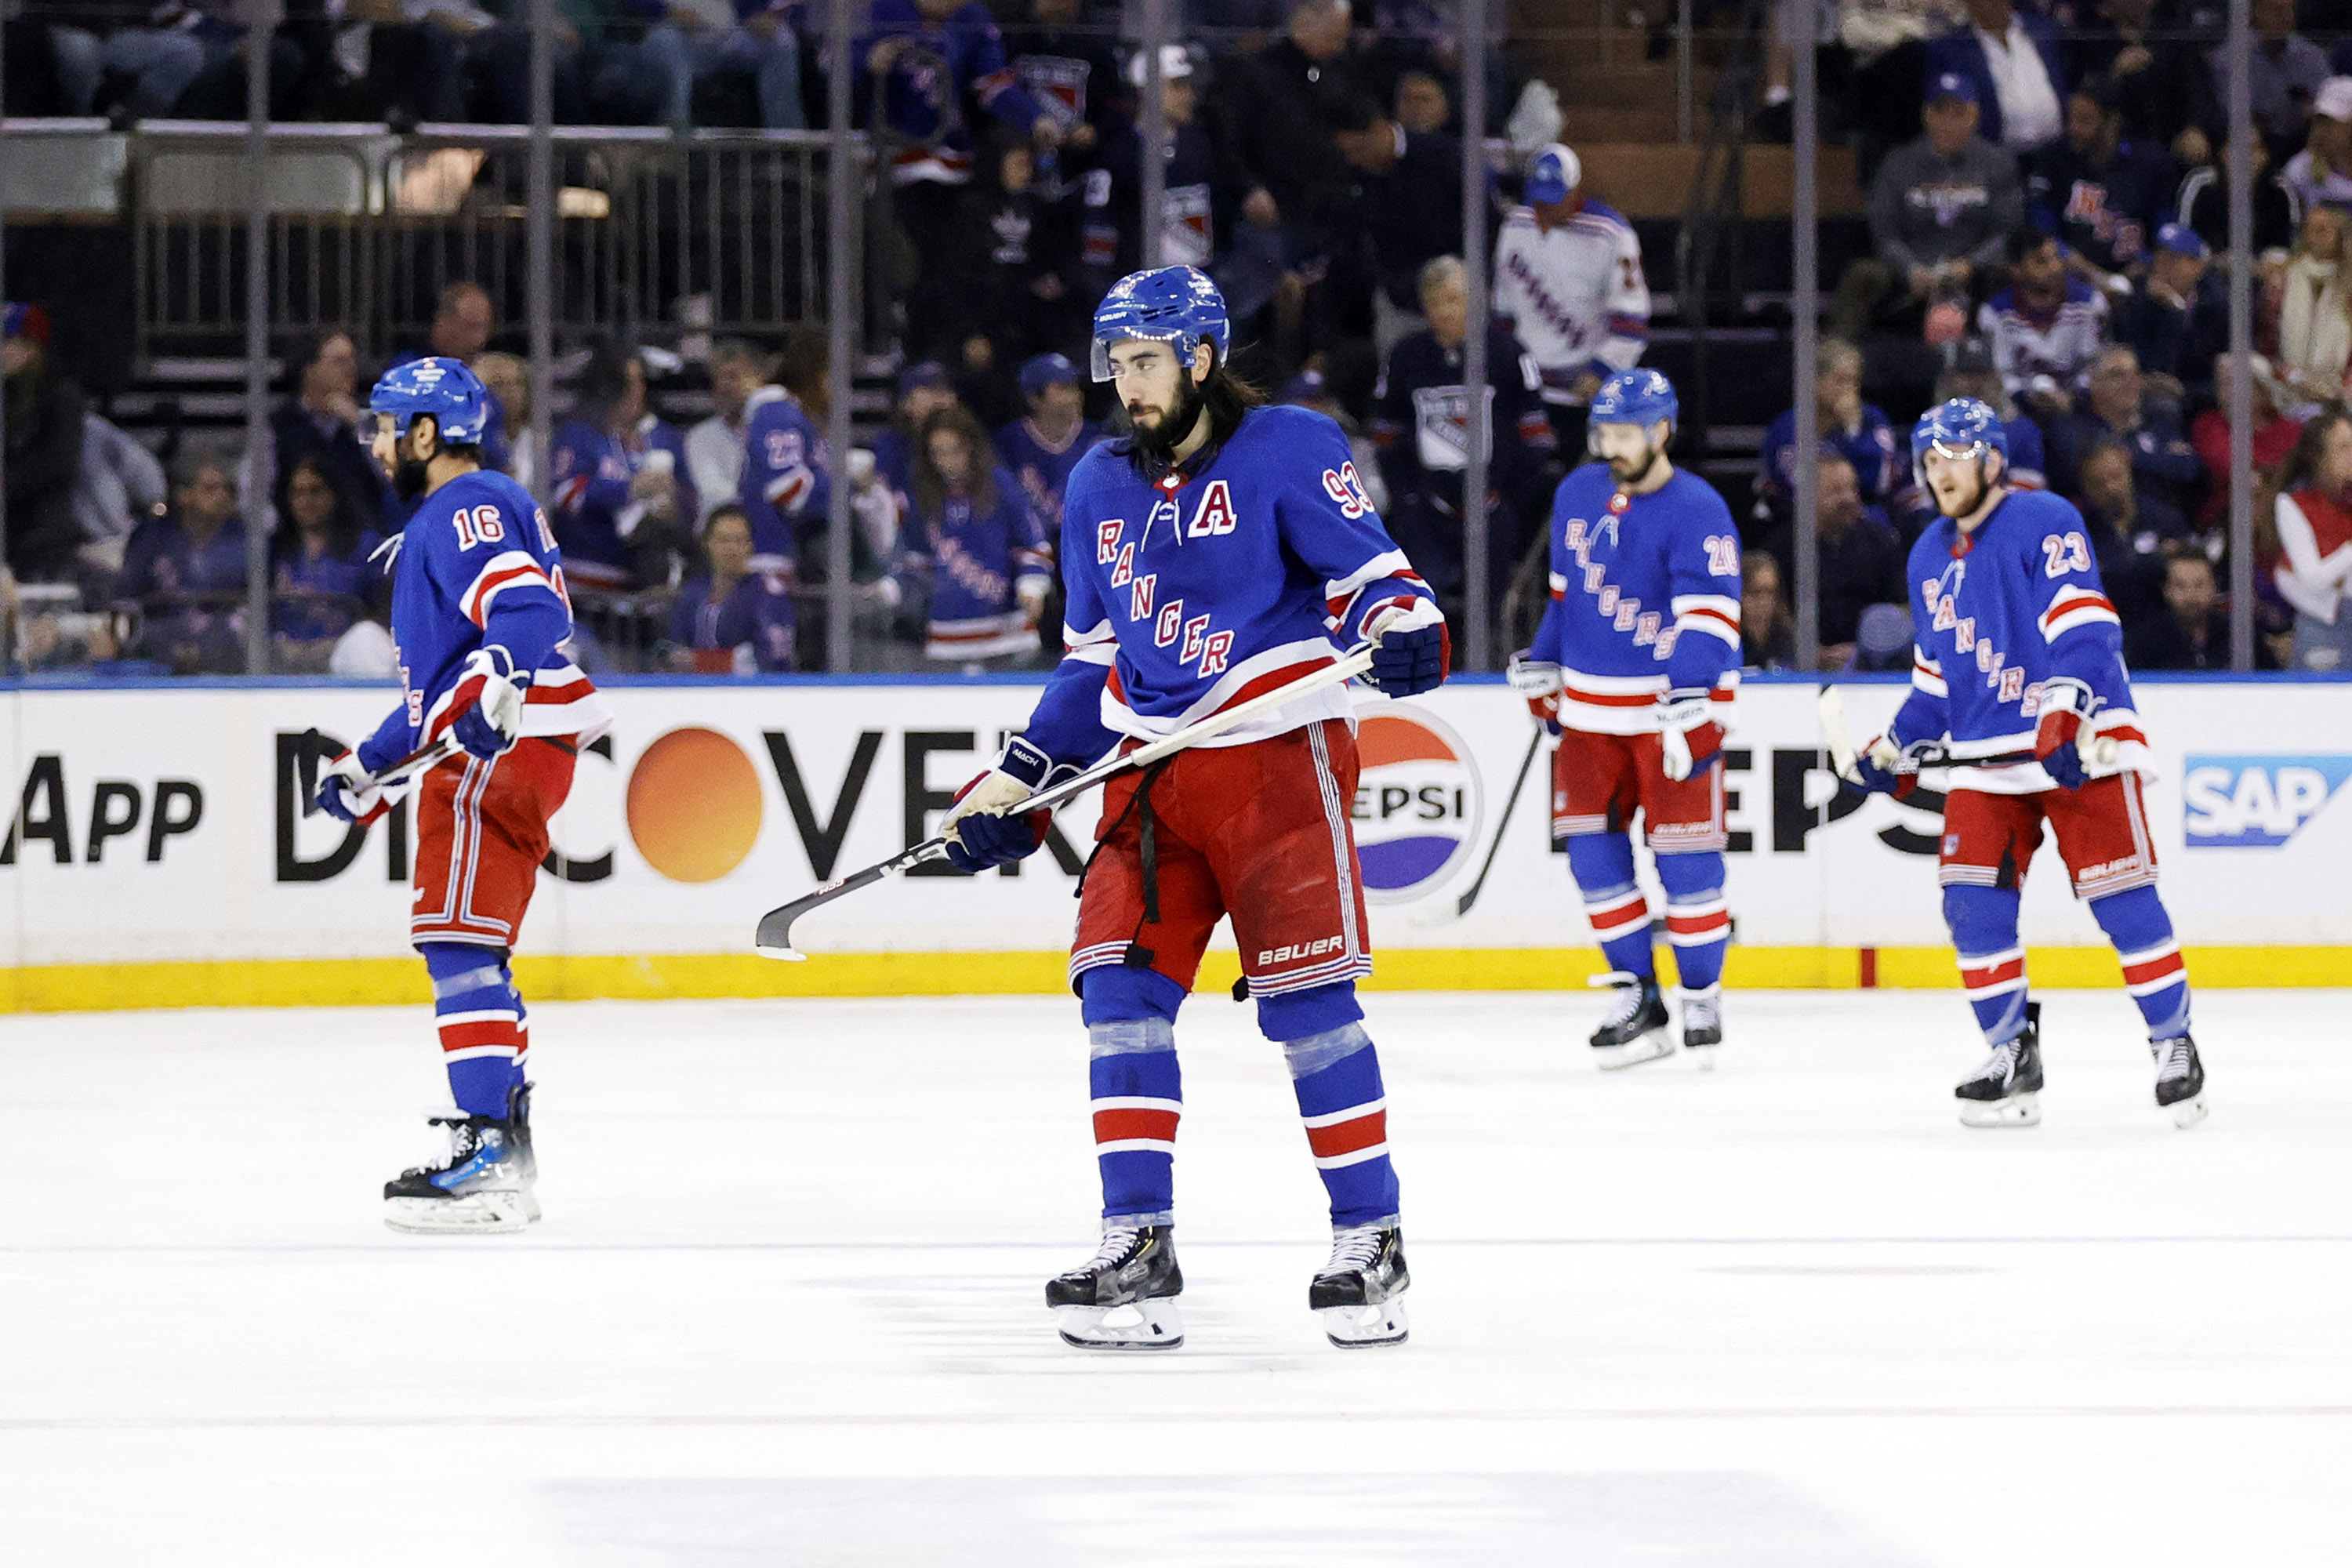 The Rangers fall behind at the same old playoff spot — and now need a road save for the ages